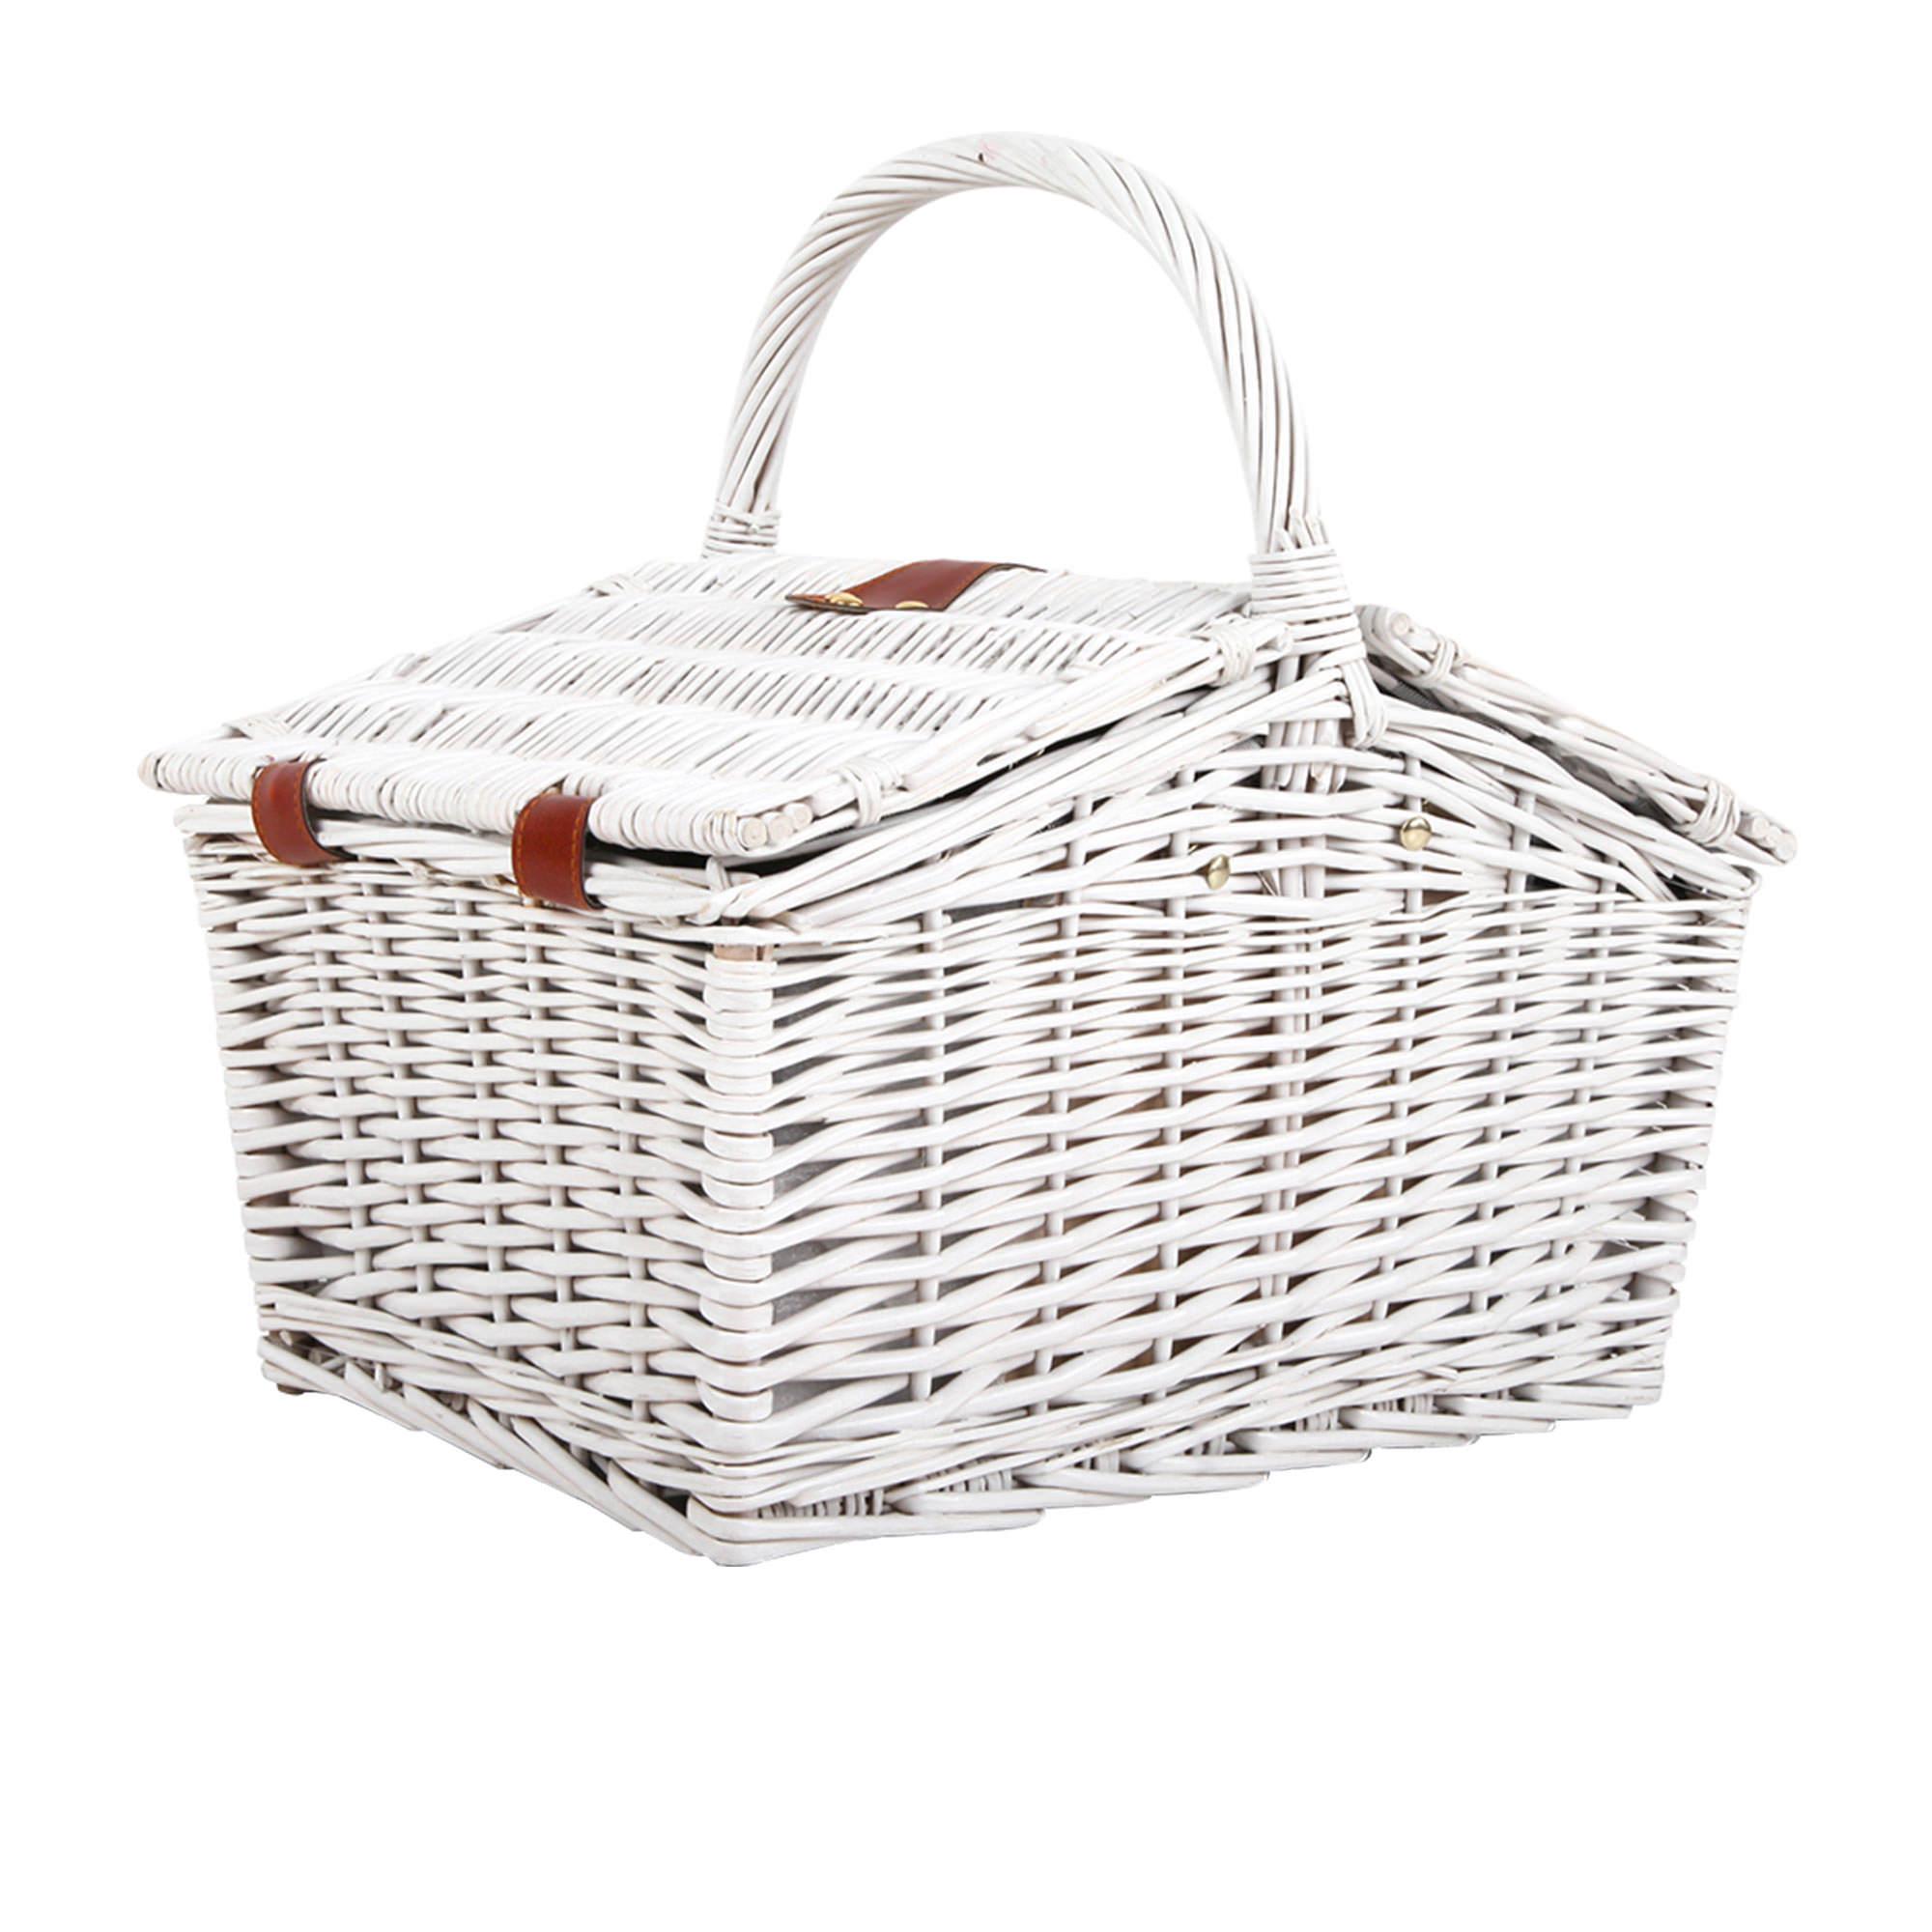 Alfresco 2 Person Deluxe Picnic Basket with Black/White Check Blanket Image 3